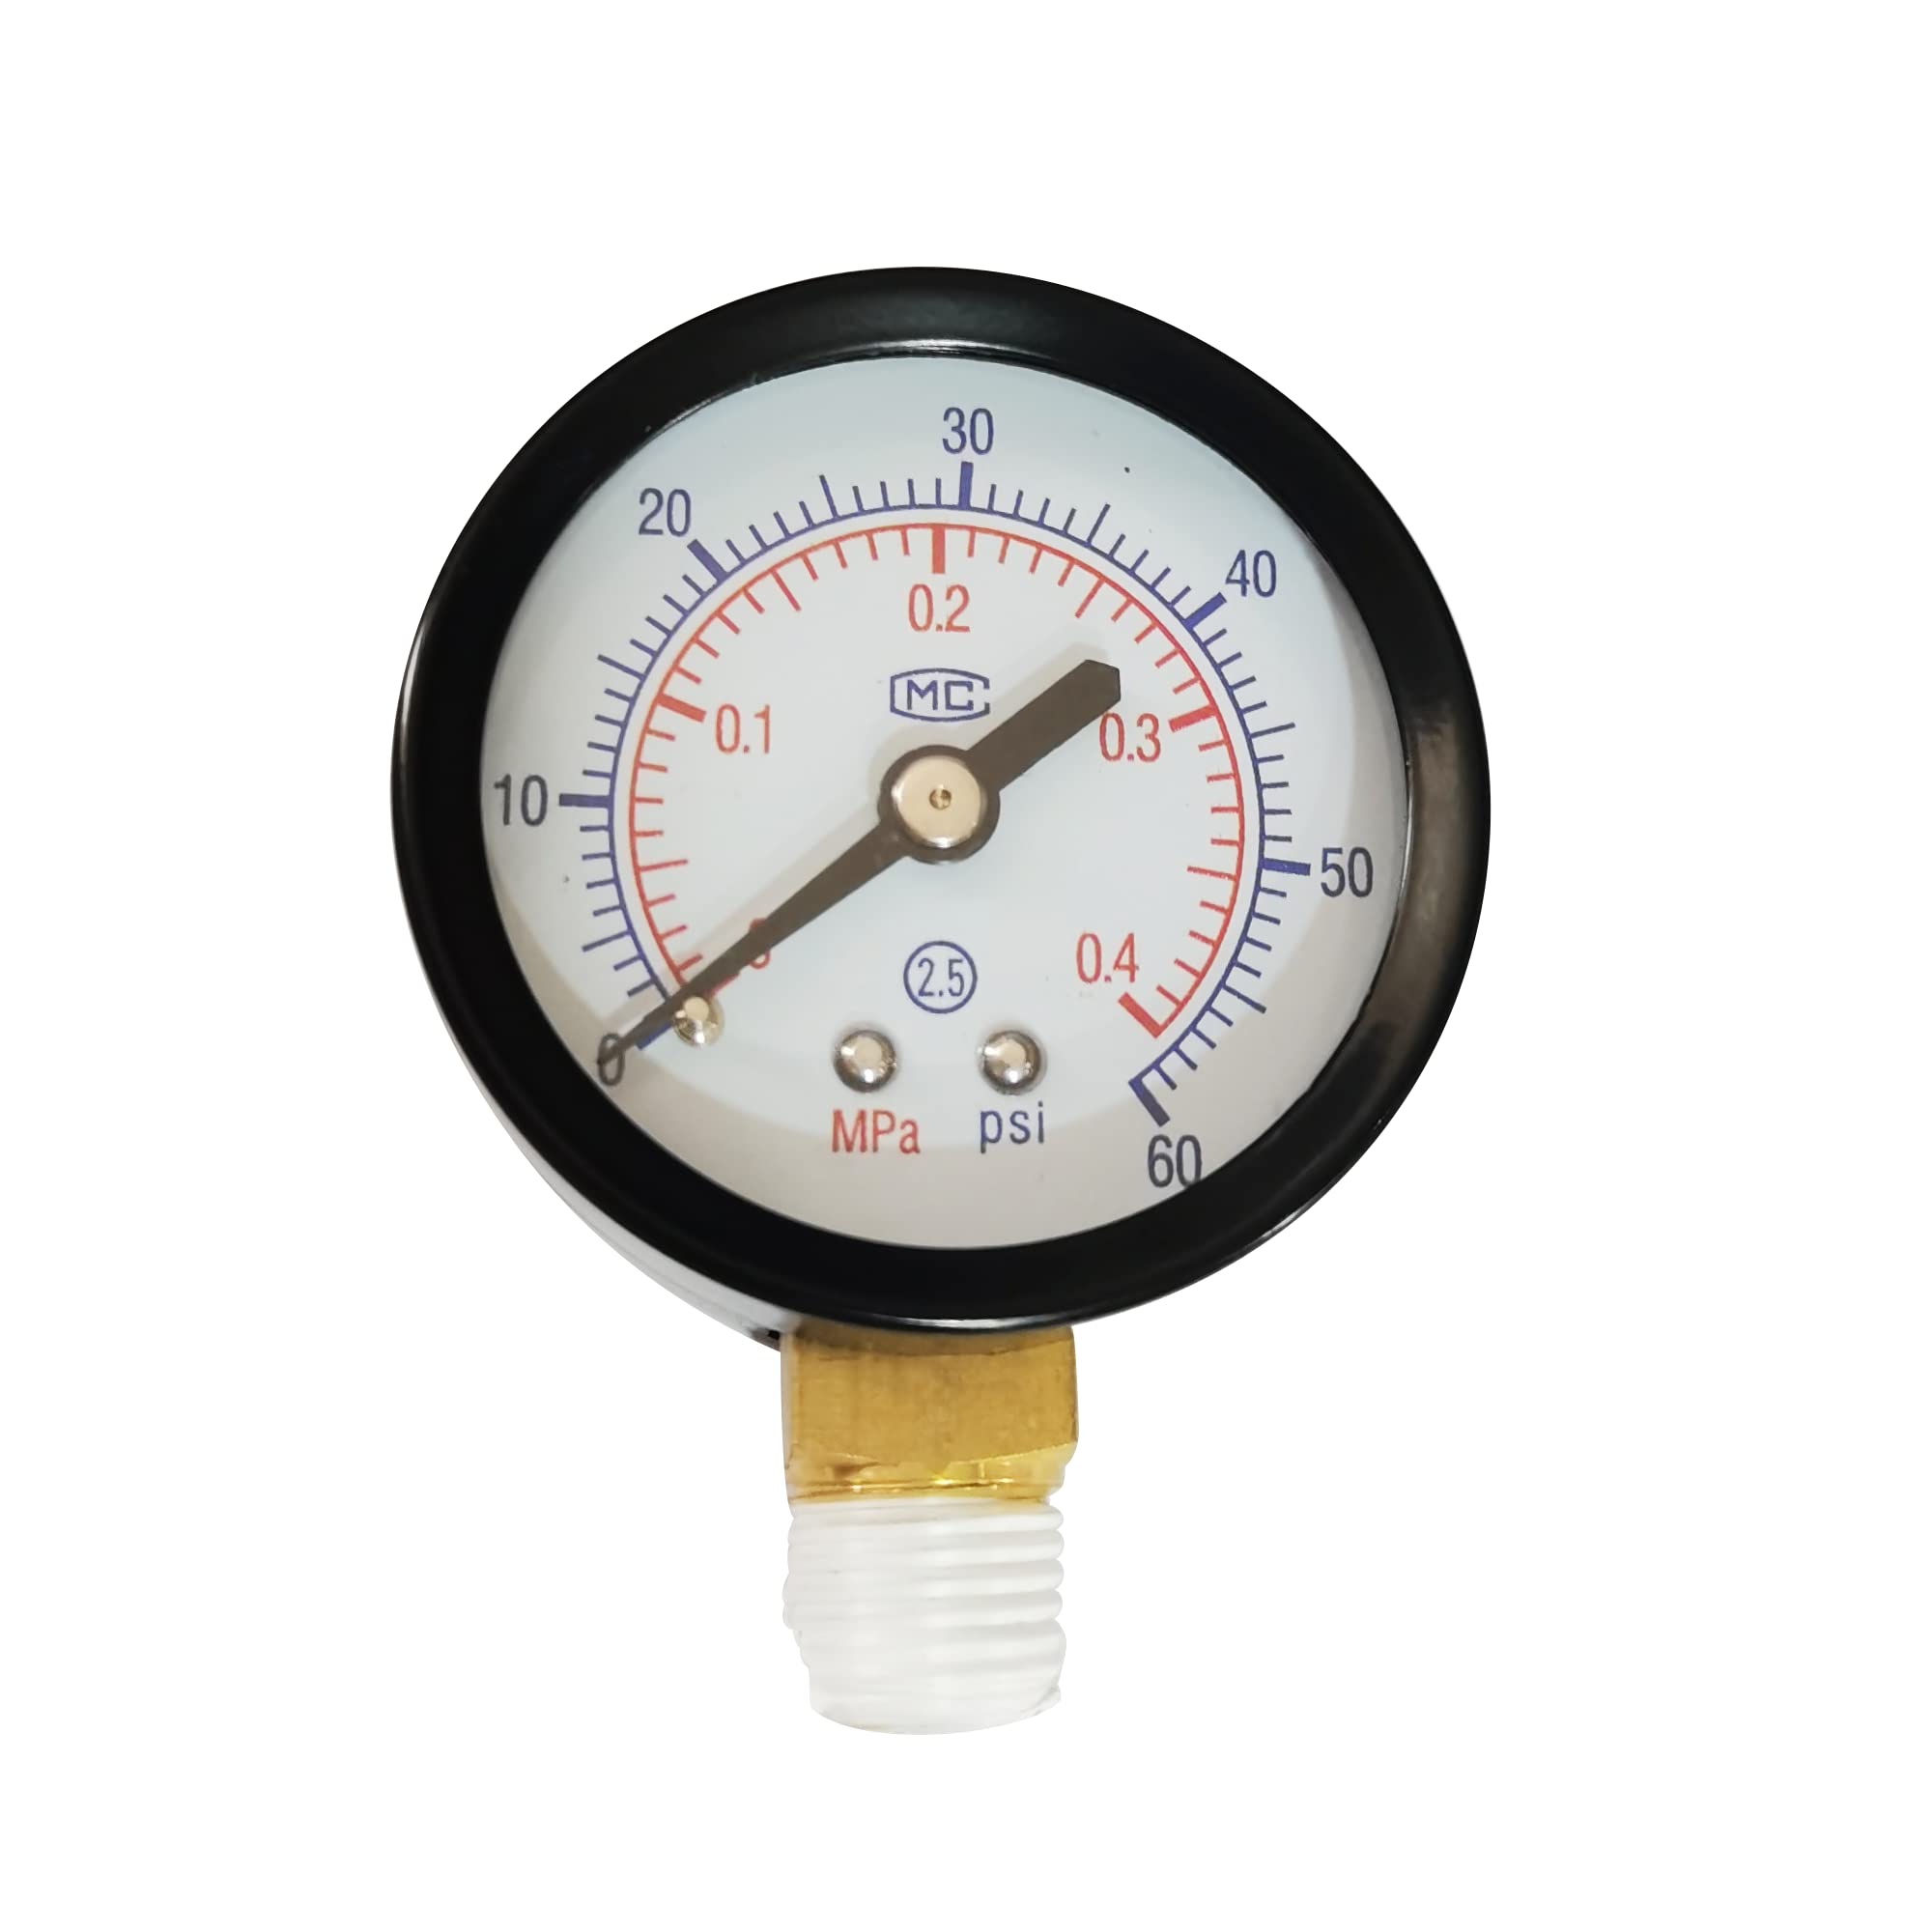 DEF Boxed Pressure Gauge 0-60 PSI Replacement for Select Sand & D.E. Pool Filter ECX270861